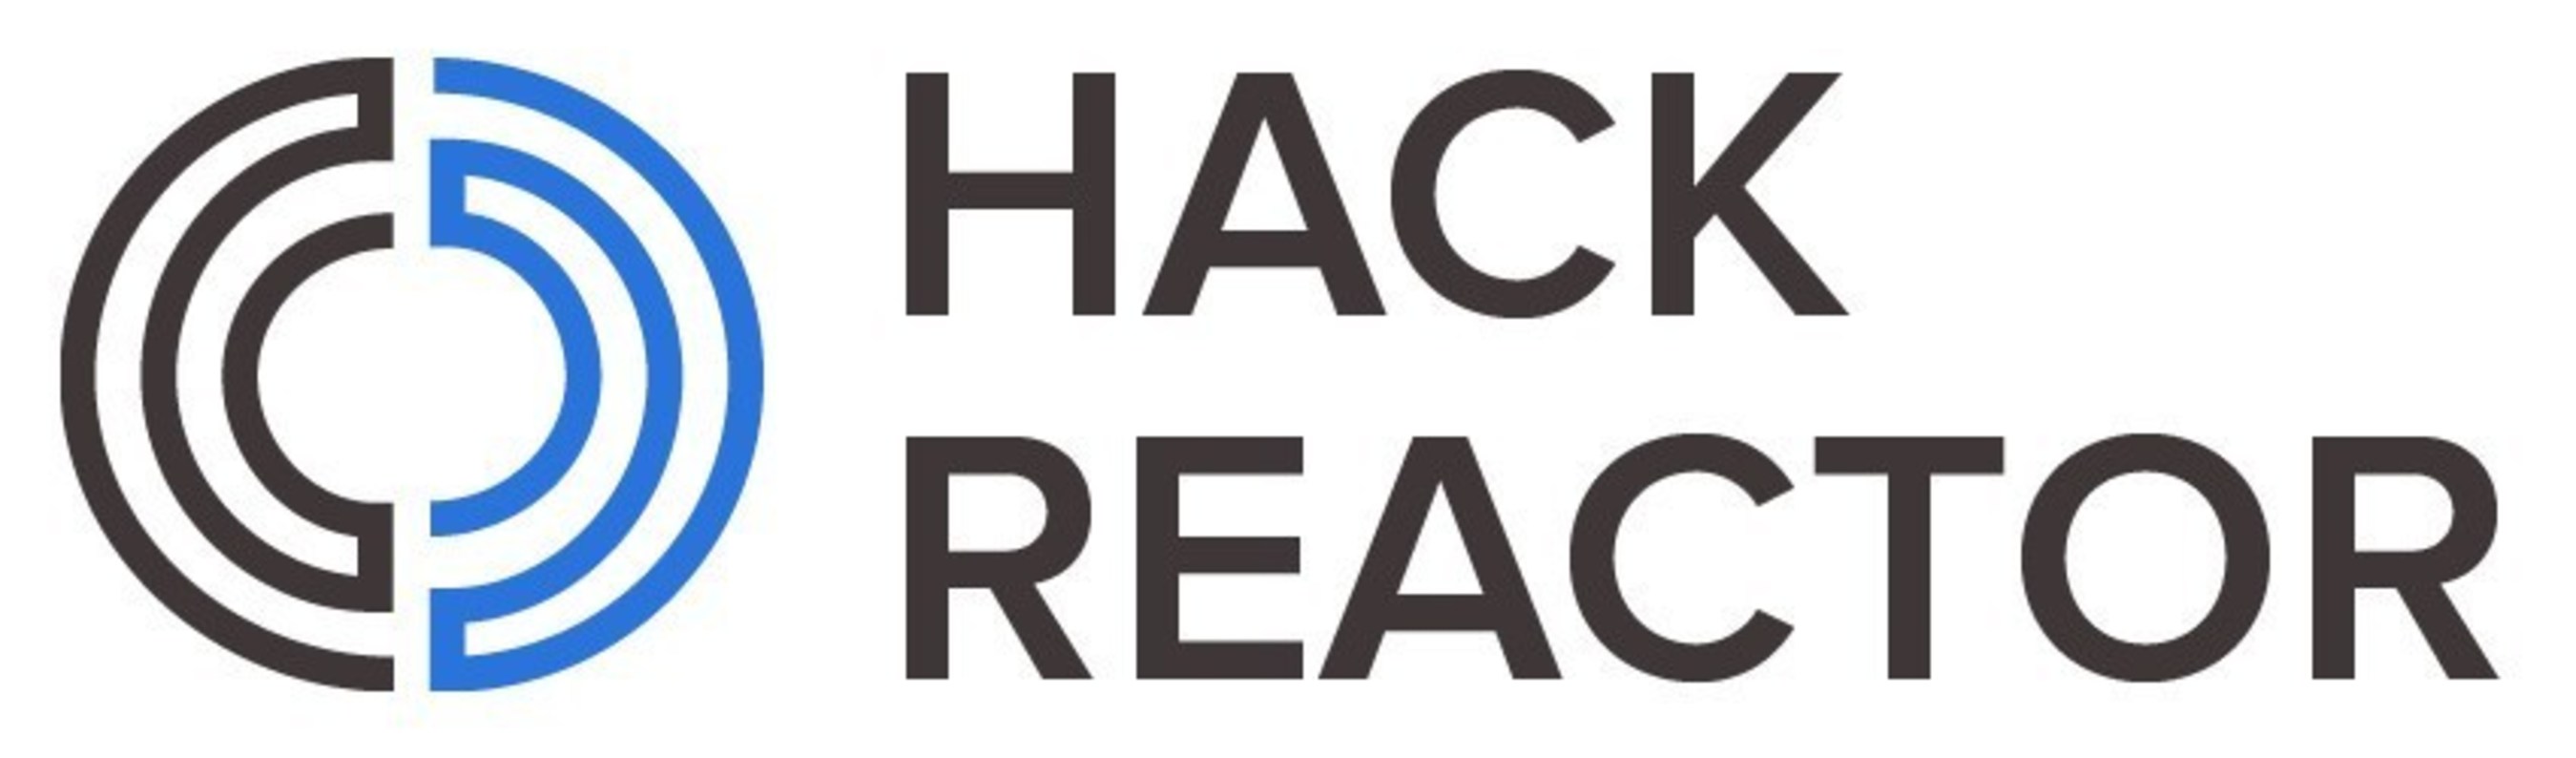 Hack Reactor is an advanced immersive program that trains students 11 hours a day, 6 days a week, over 12 weeks in a curriculum focused on computer science fundamentals and JavaScript.